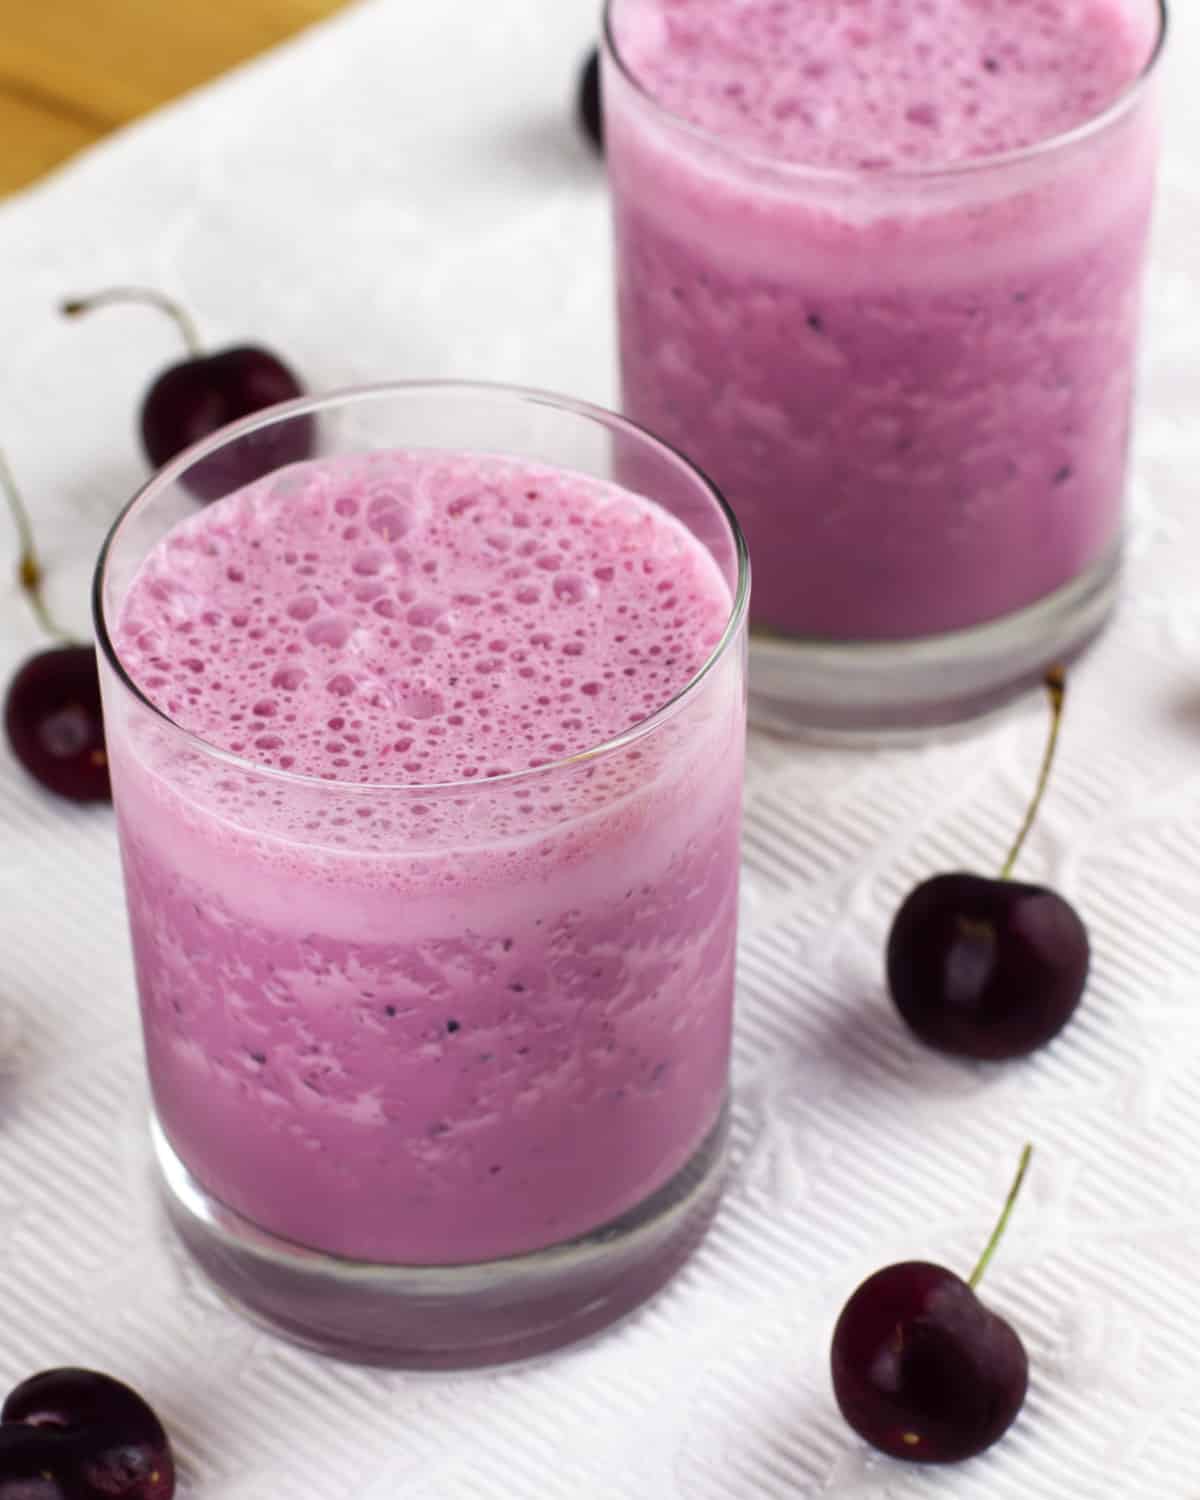 Cherry milkshake in a glass with bubbly froth on top.